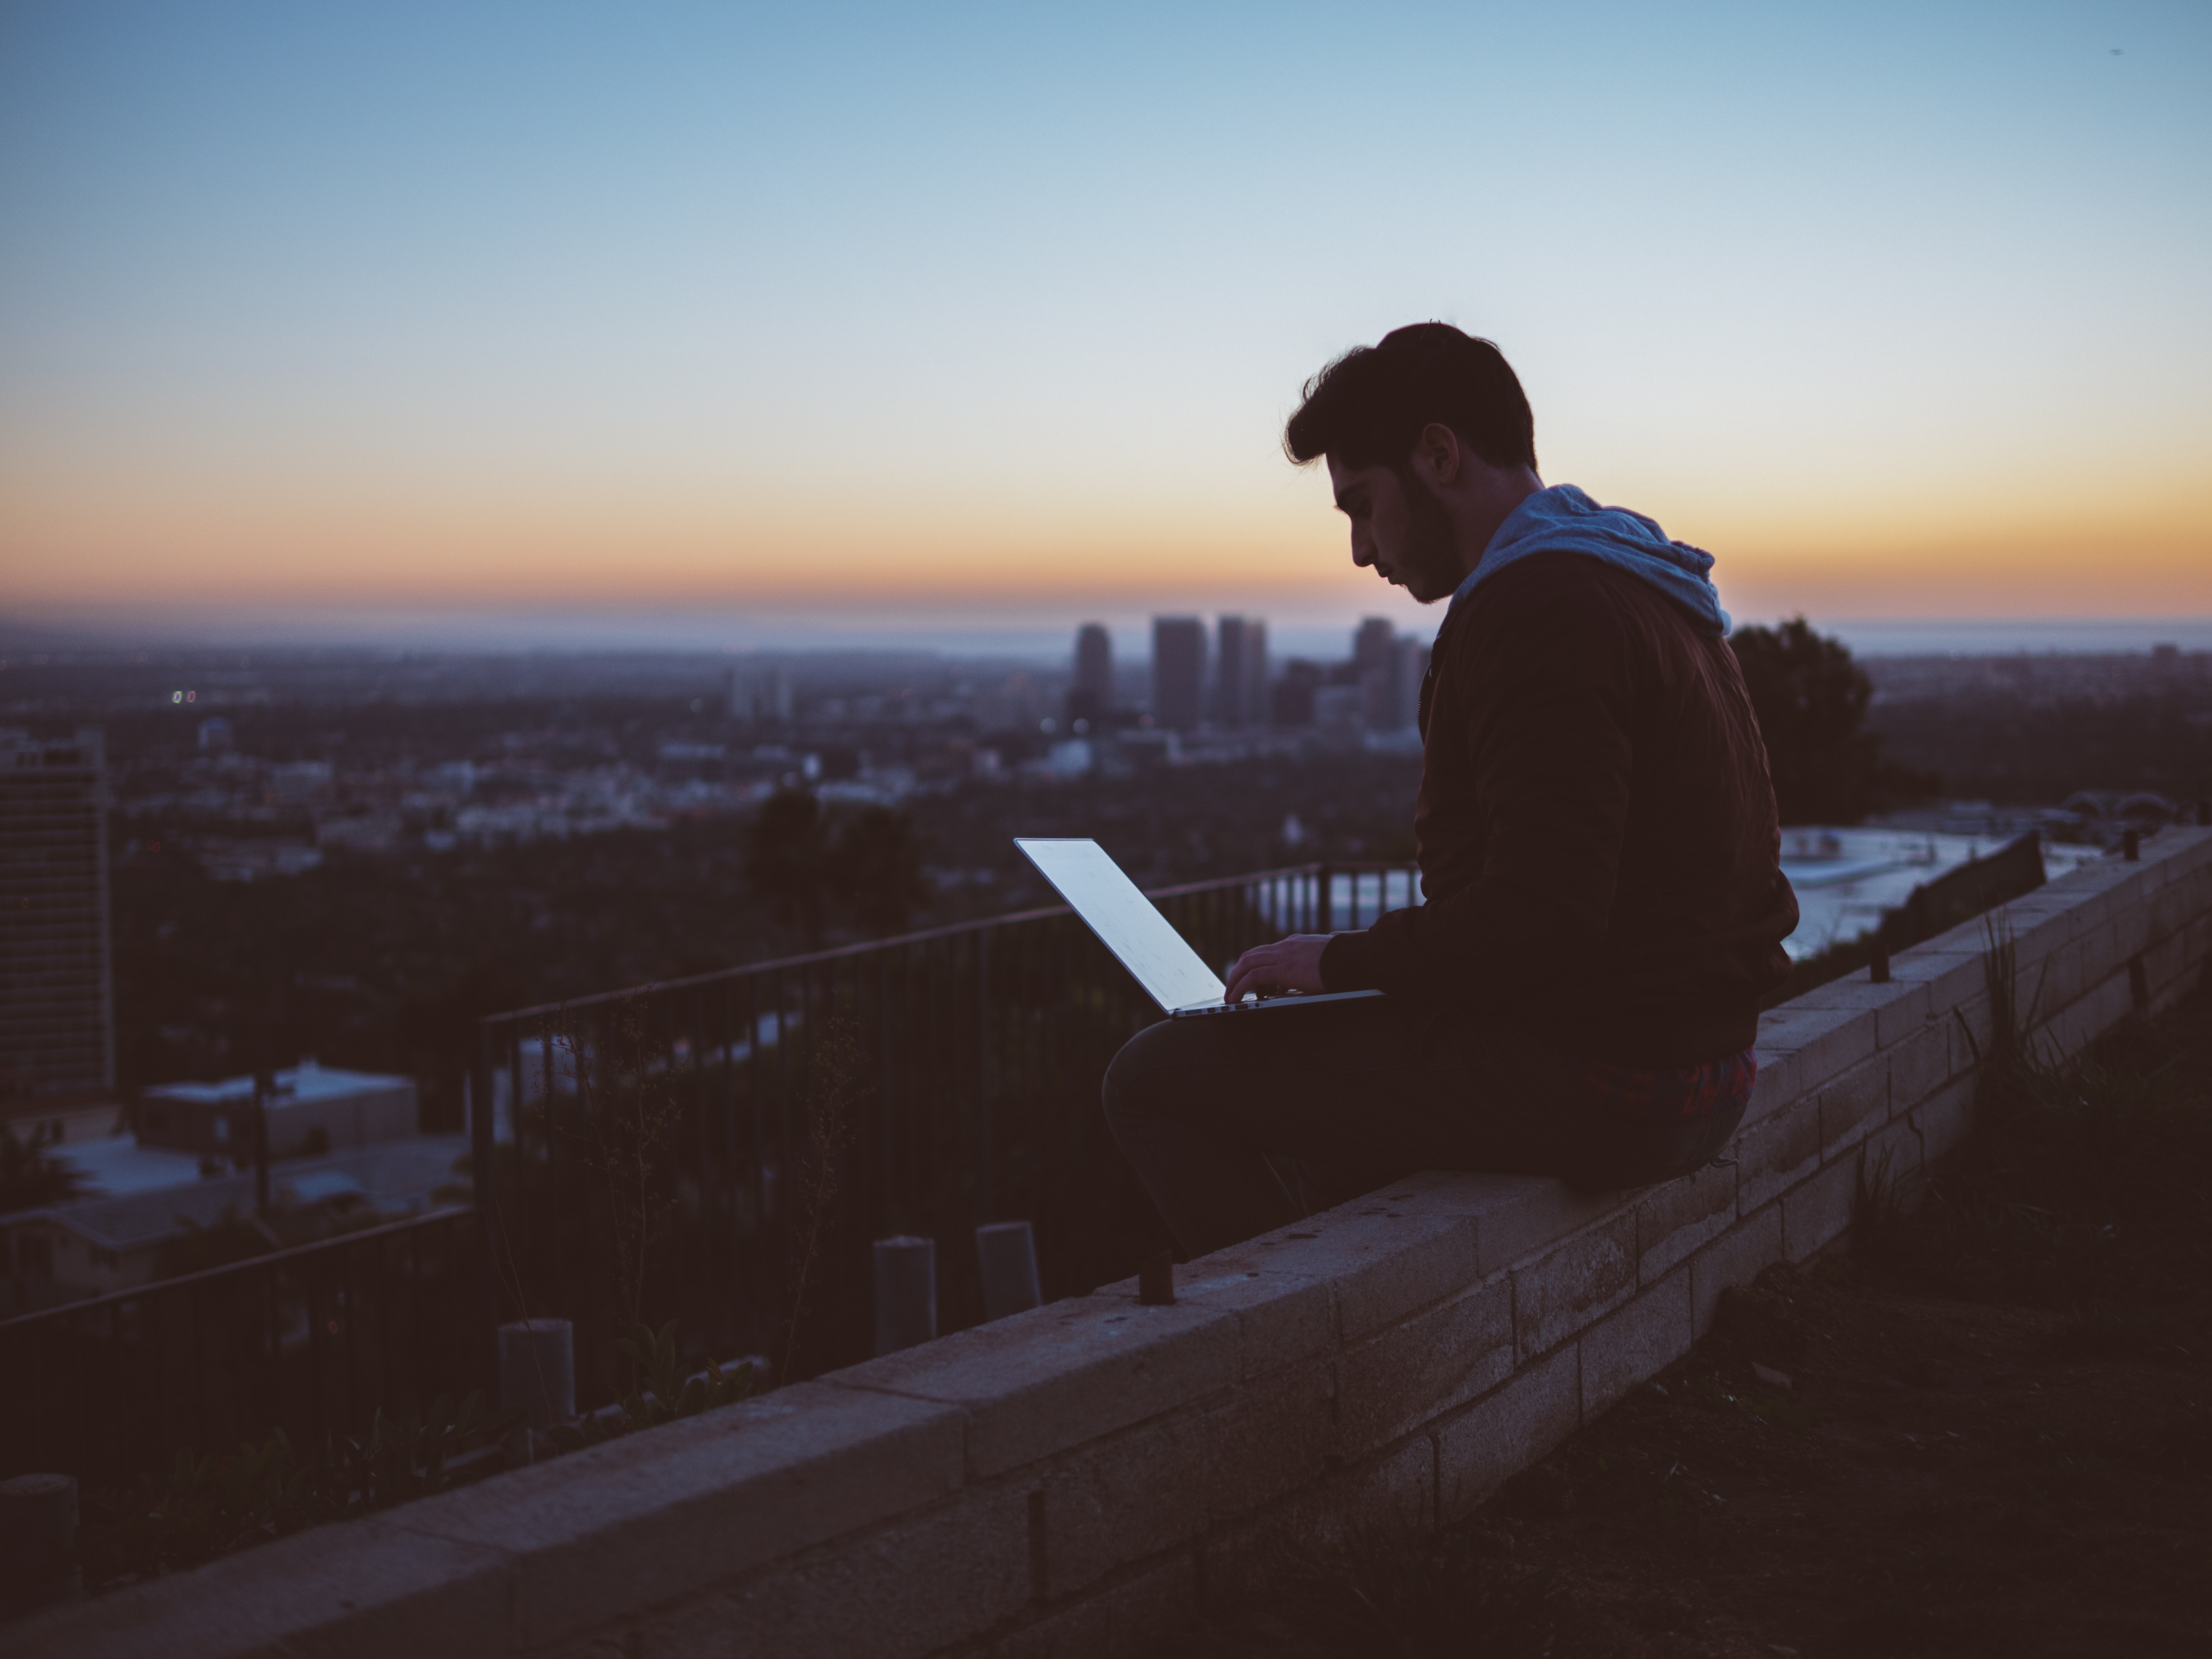 4608x3456 #sit, #person, #guy, #male, #sunset, #hoodie, #man, #Public domain image, #working, #sat, #computer, #sitting, #laptop, #skyline, #work, #cityscape, #roof, #workspace, #city, #rooftop, #urban. Mocah HD Wallpaper